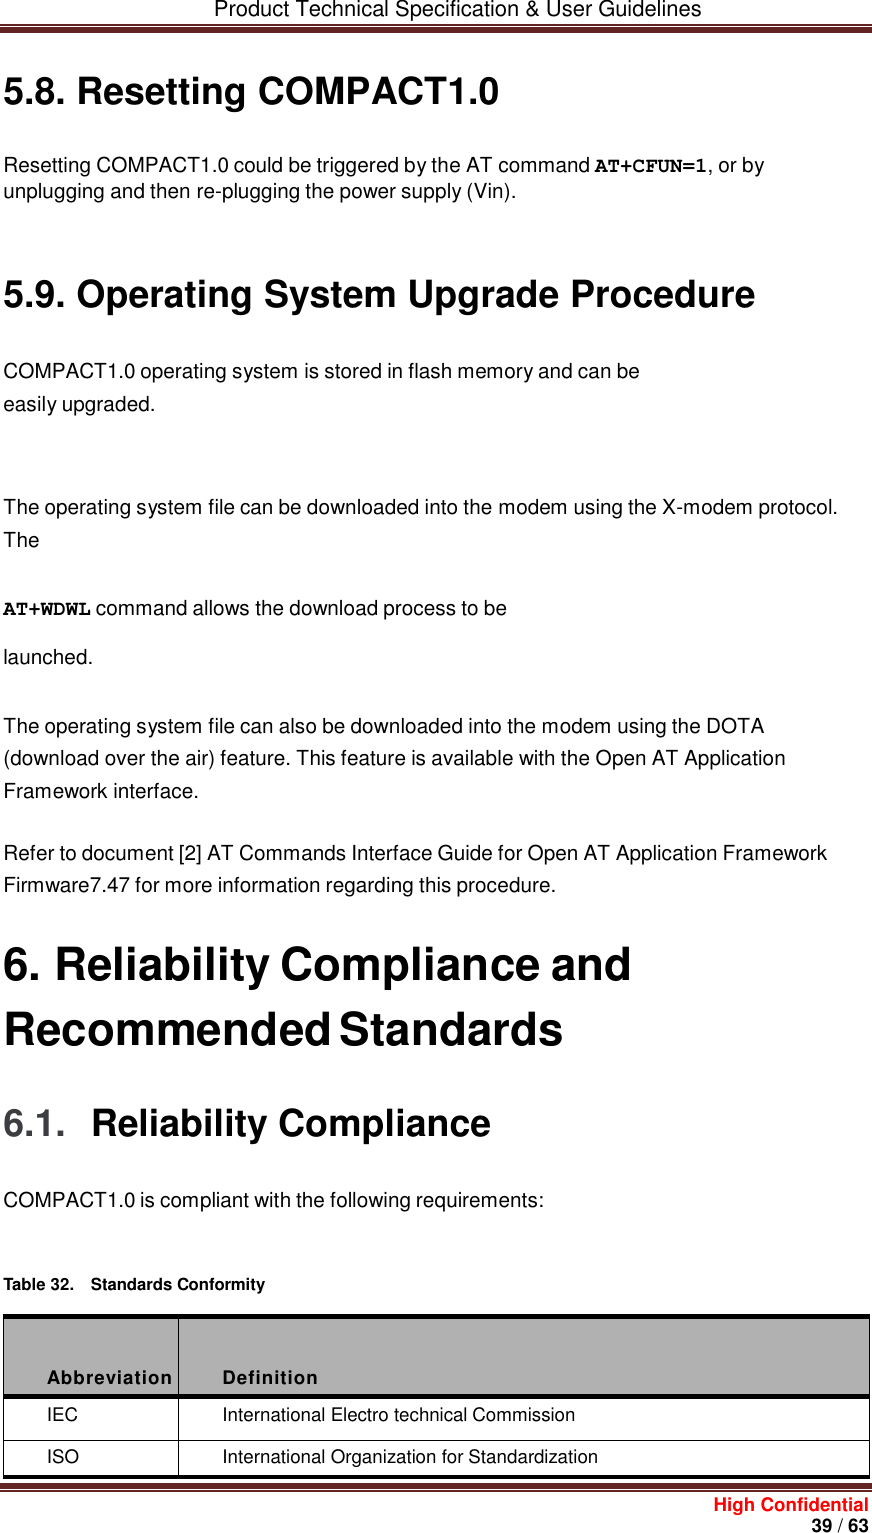         Product Technical Specification &amp; User Guidelines     High Confidential       39 / 63  5.8. Resetting COMPACT1.0 Resetting COMPACT1.0 could be triggered by the AT command AT+CFUN=1, or by unplugging and then re-plugging the power supply (Vin).    5.9. Operating System Upgrade Procedure COMPACT1.0 operating system is stored in flash memory and can be easily upgraded.    The operating system file can be downloaded into the modem using the X-modem protocol. The AT+WDWL command allows the download process to be launched.   The operating system file can also be downloaded into the modem using the DOTA (download over the air) feature. This feature is available with the Open AT Application Framework interface. Refer to document [2] AT Commands Interface Guide for Open AT Application Framework Firmware7.47 for more information regarding this procedure. 6. Reliability Compliance and Recommended Standards 6.1.  Reliability Compliance COMPACT1.0 is compliant with the following requirements:    Table 32.  Standards Conformity    Abbreviation  Definition IEC International Electro technical Commission ISO International Organization for Standardization 